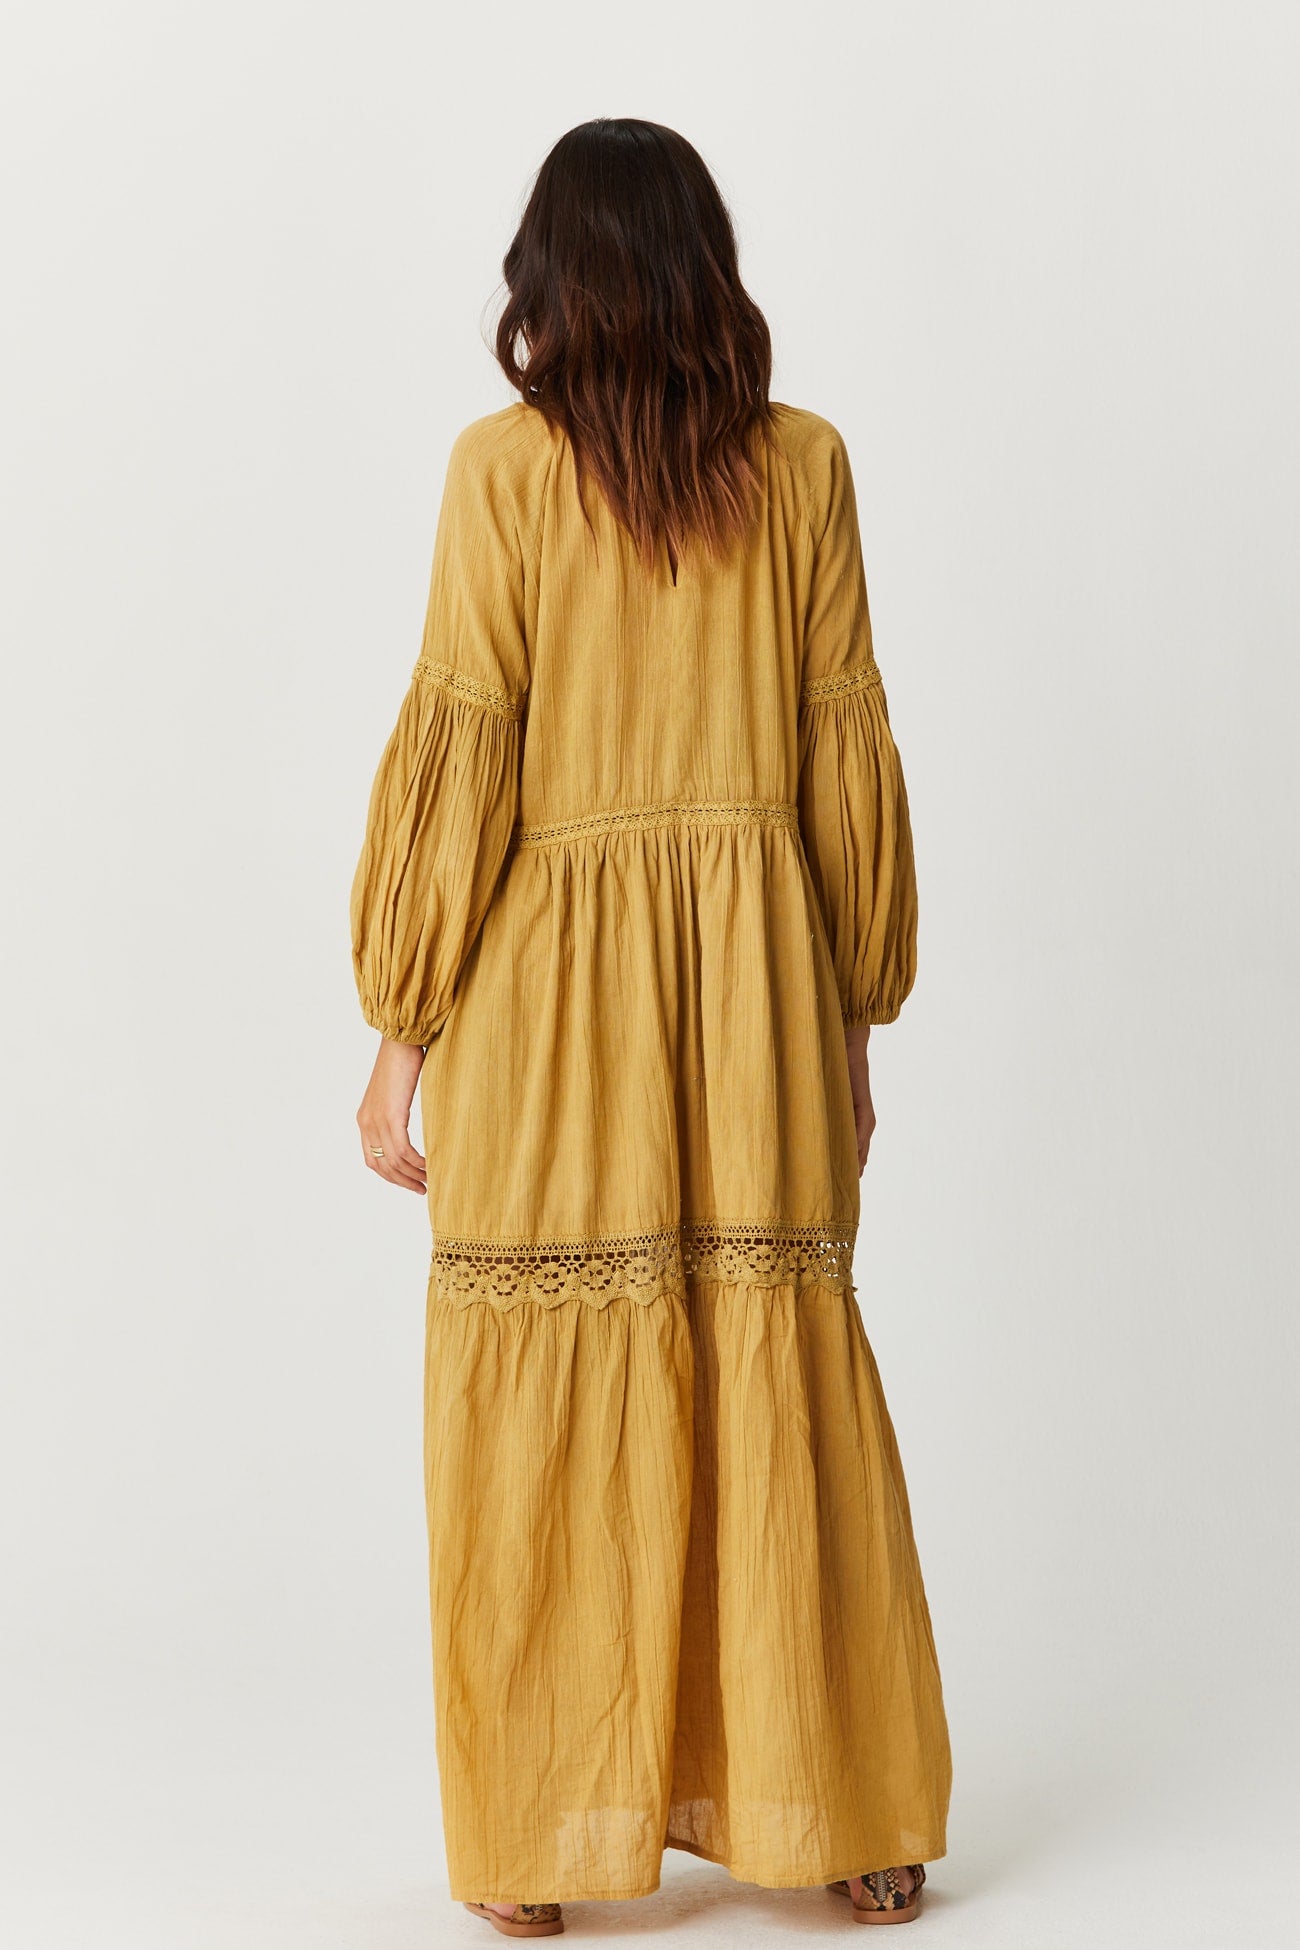 Adelaide Maxi Dress – Jen's Pirate Booty